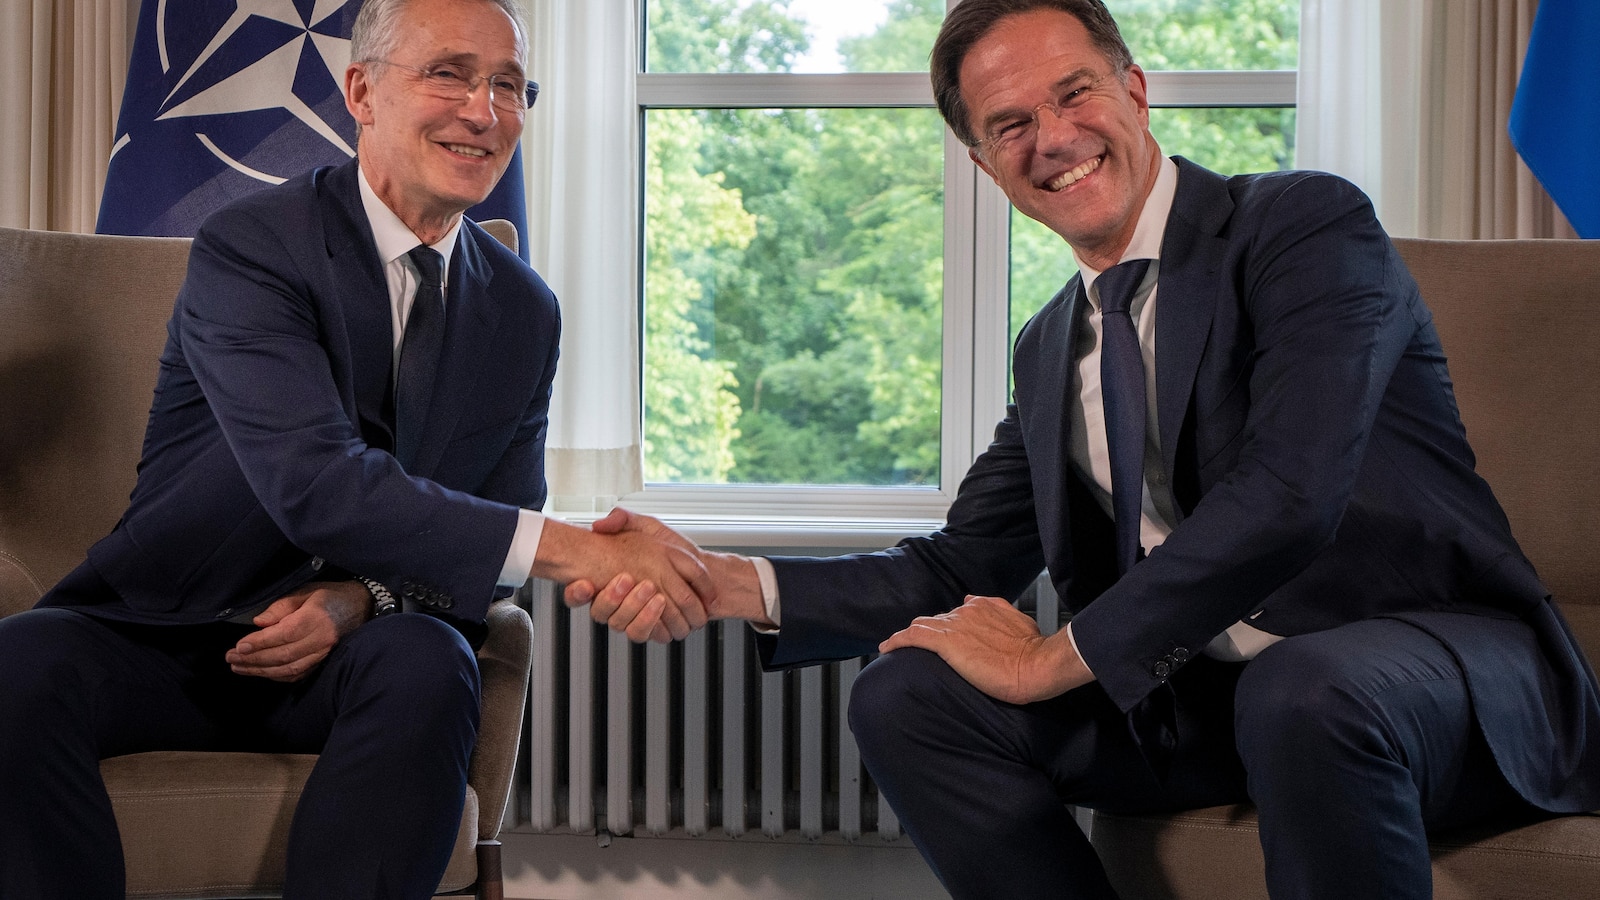 Mark Rutte appointed as NATO's next secretary-general after serving as Dutch Prime Minister